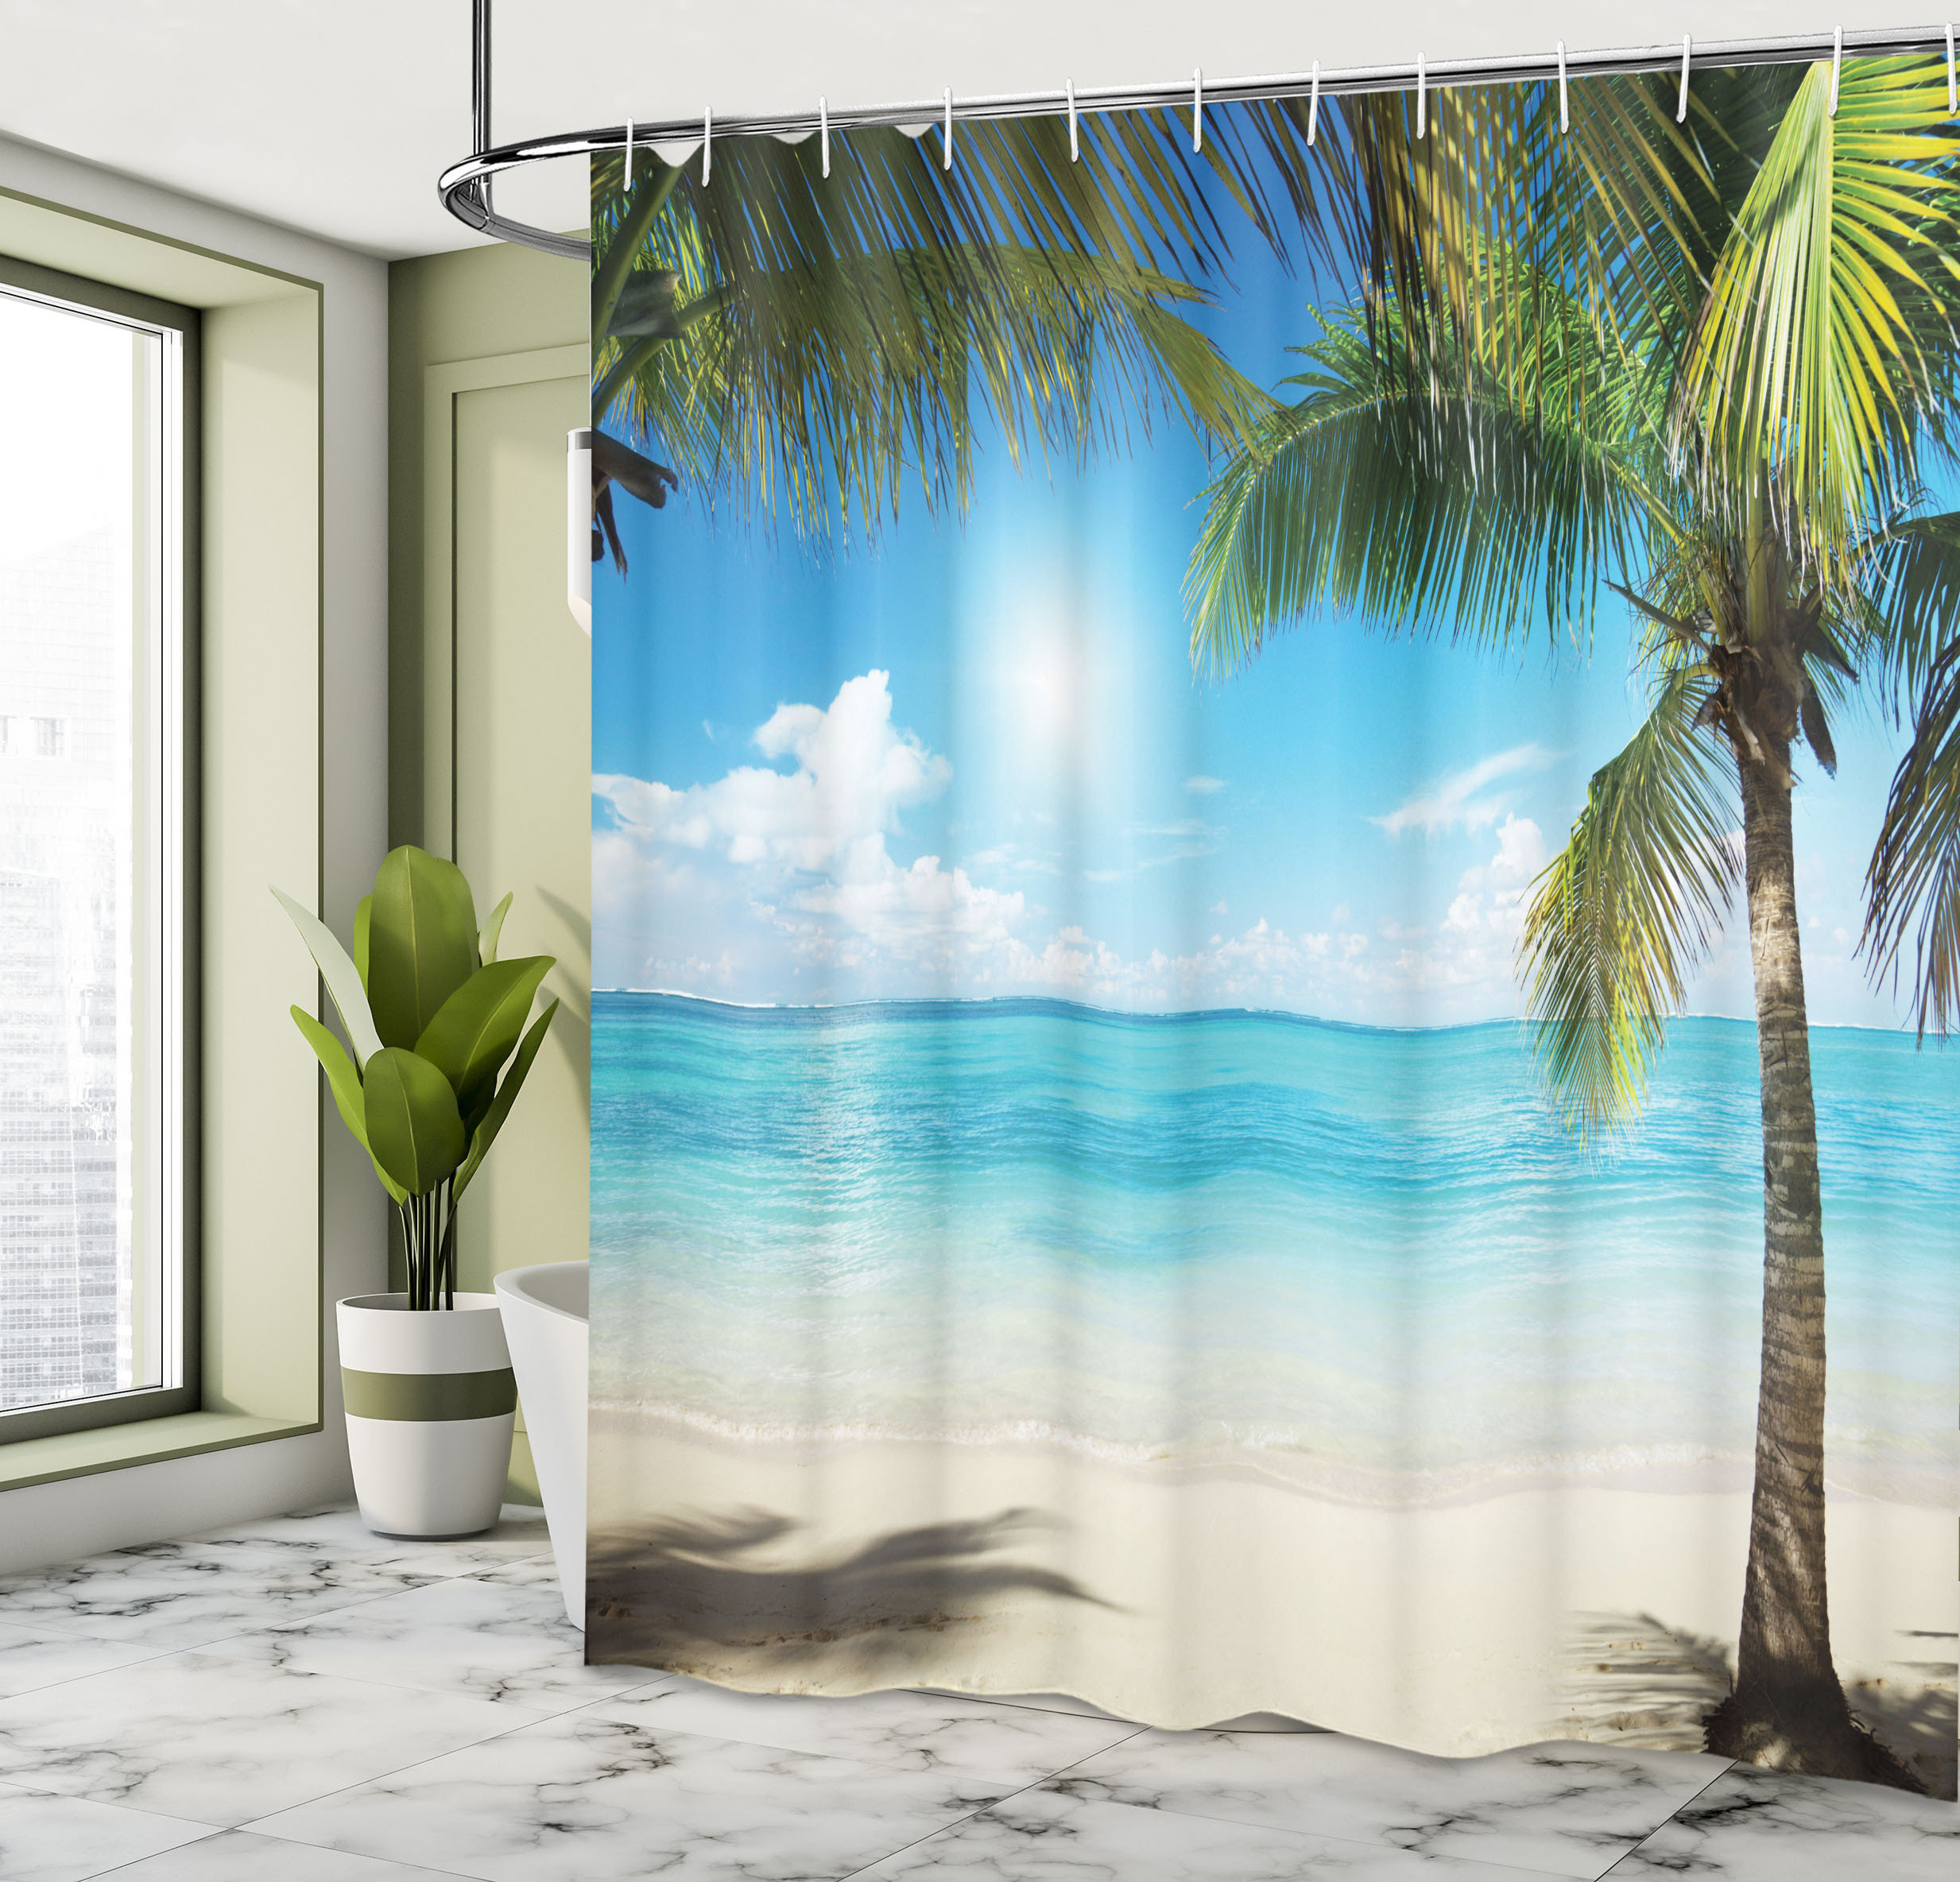 Bless international Shower Curtain with Hooks Included